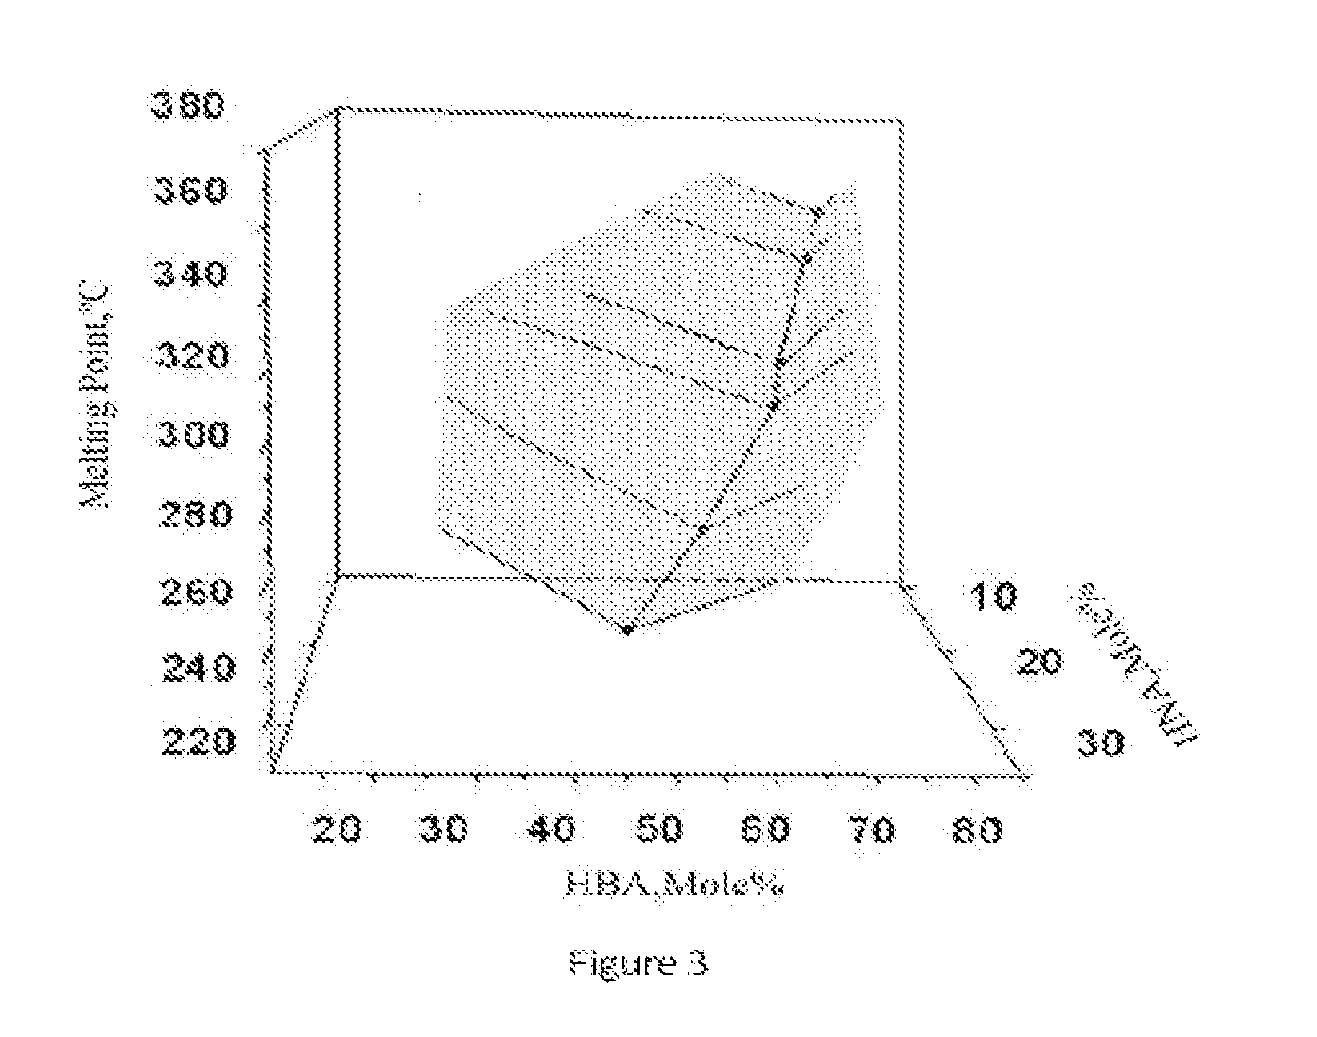 Liquid crystalline polyester compositions